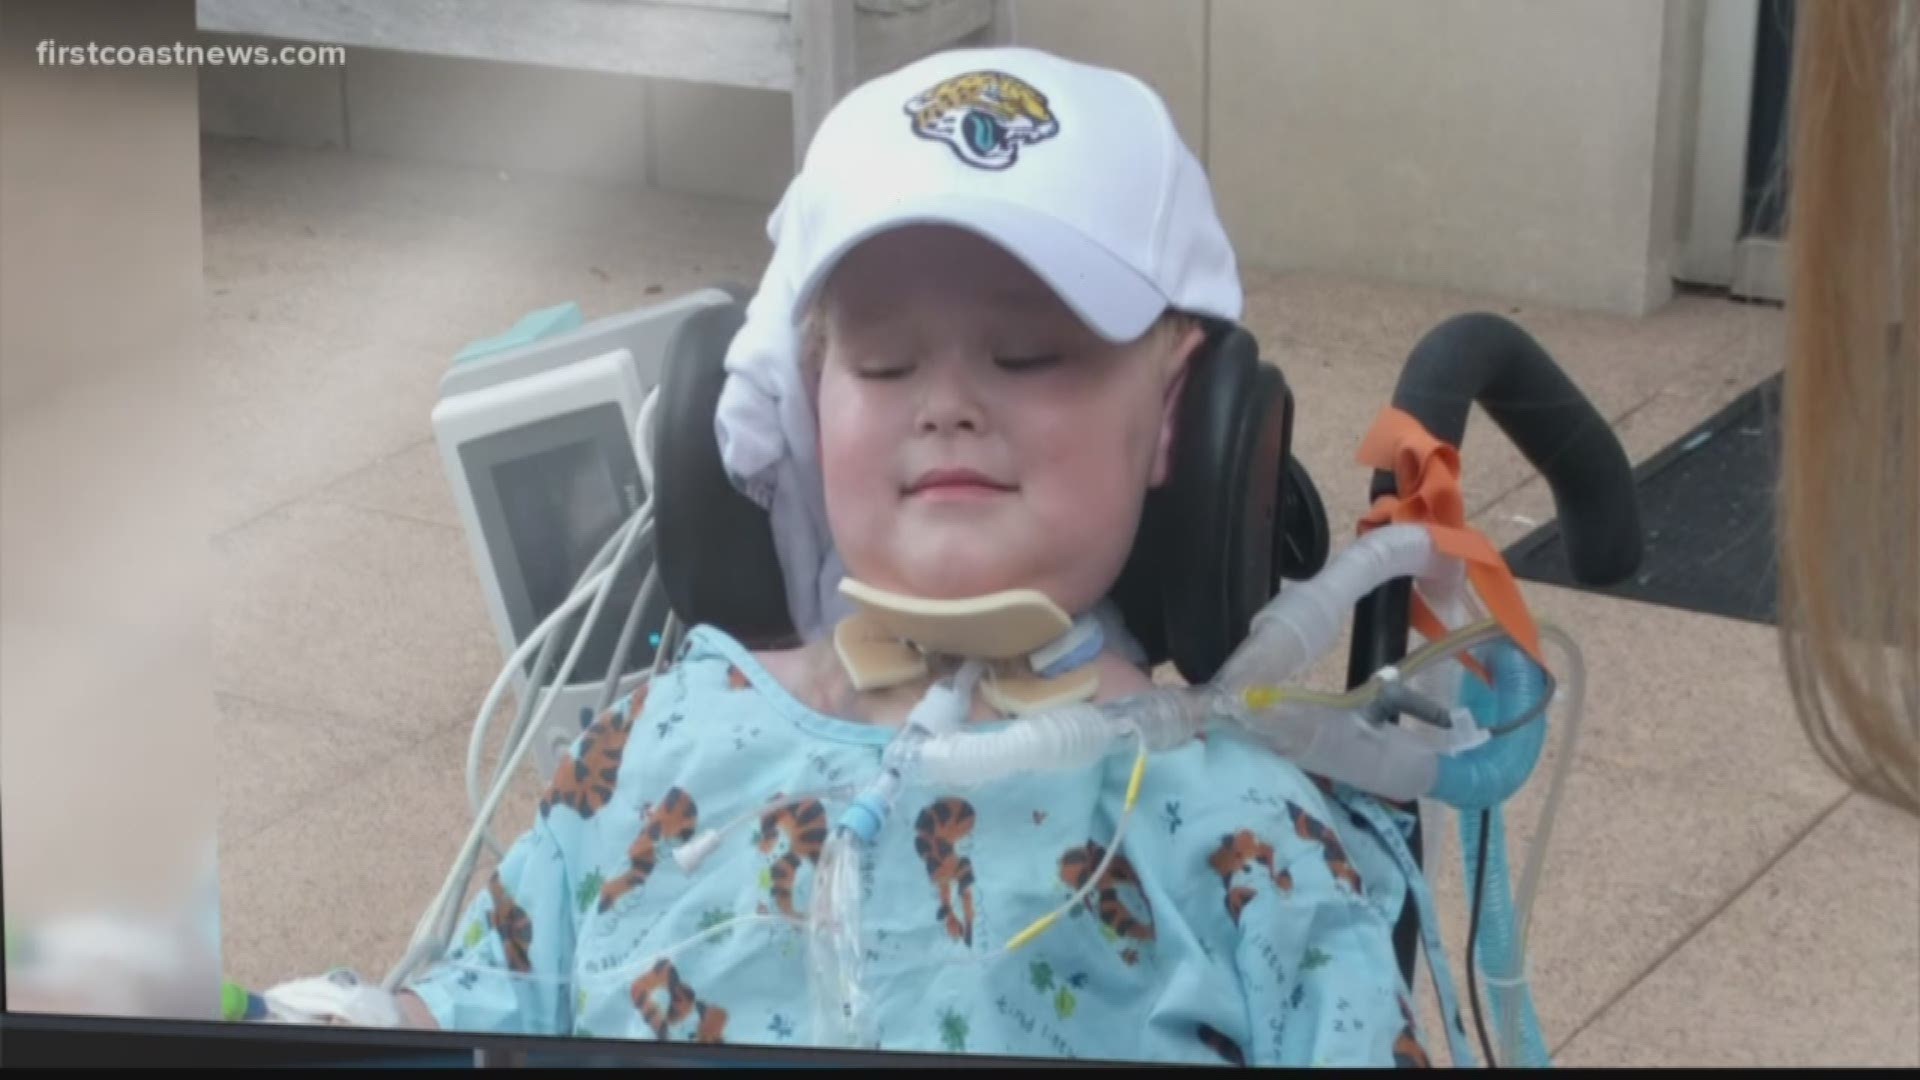 June 5 is likely a day Jennifer Greagor won't ever forget. That's the day she learned her son was diagnosed with a rare disease known as Acute Flaccid Myelitis. A disease that's bound her son Jack to a motorized scooter and ventilator 24/7.